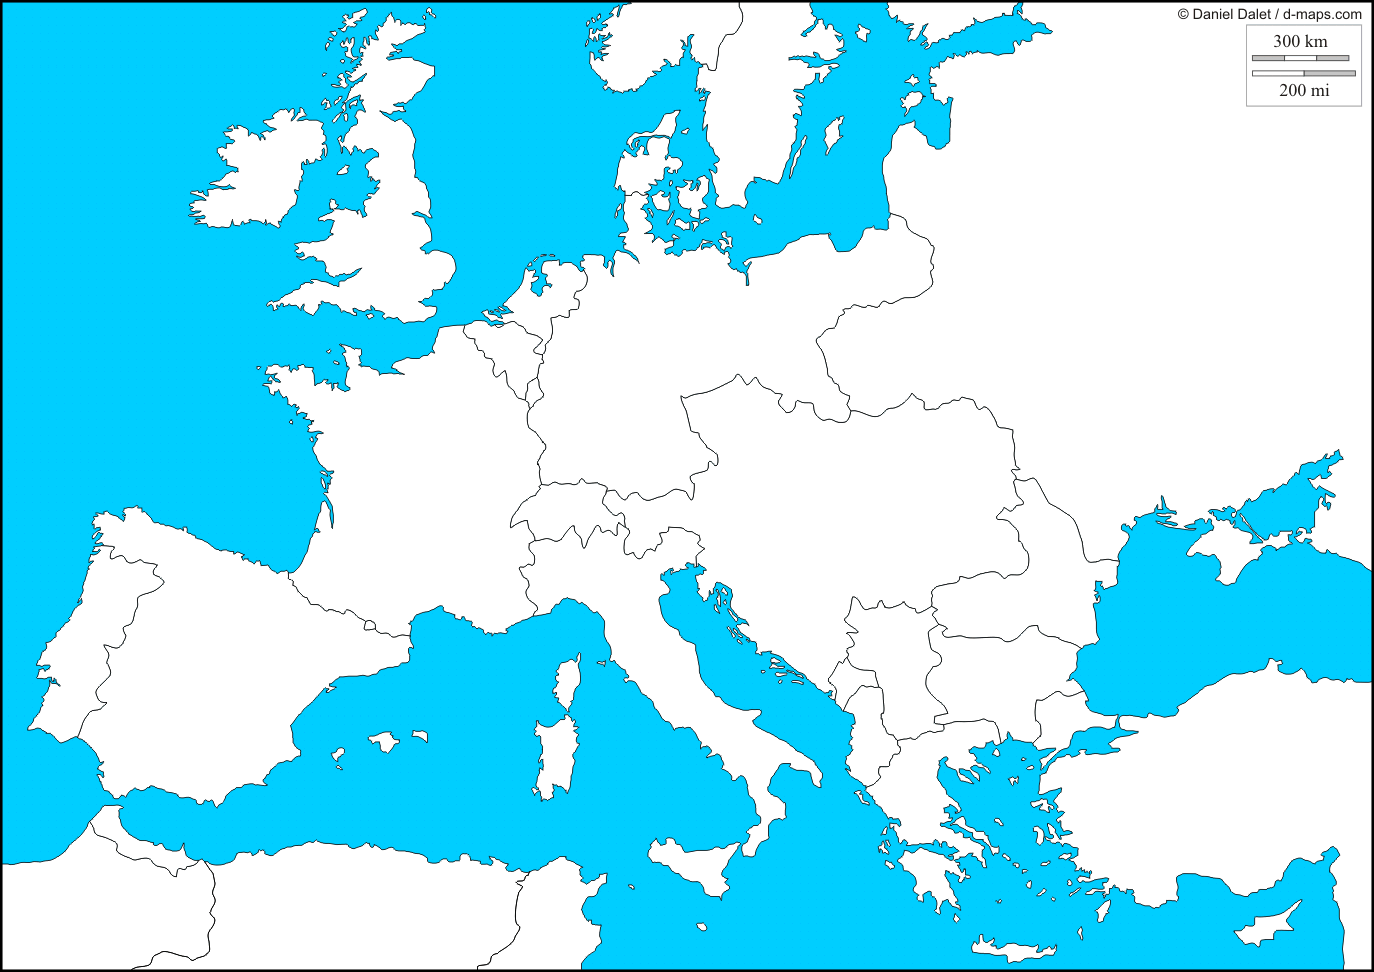 Map of Europe in 1914